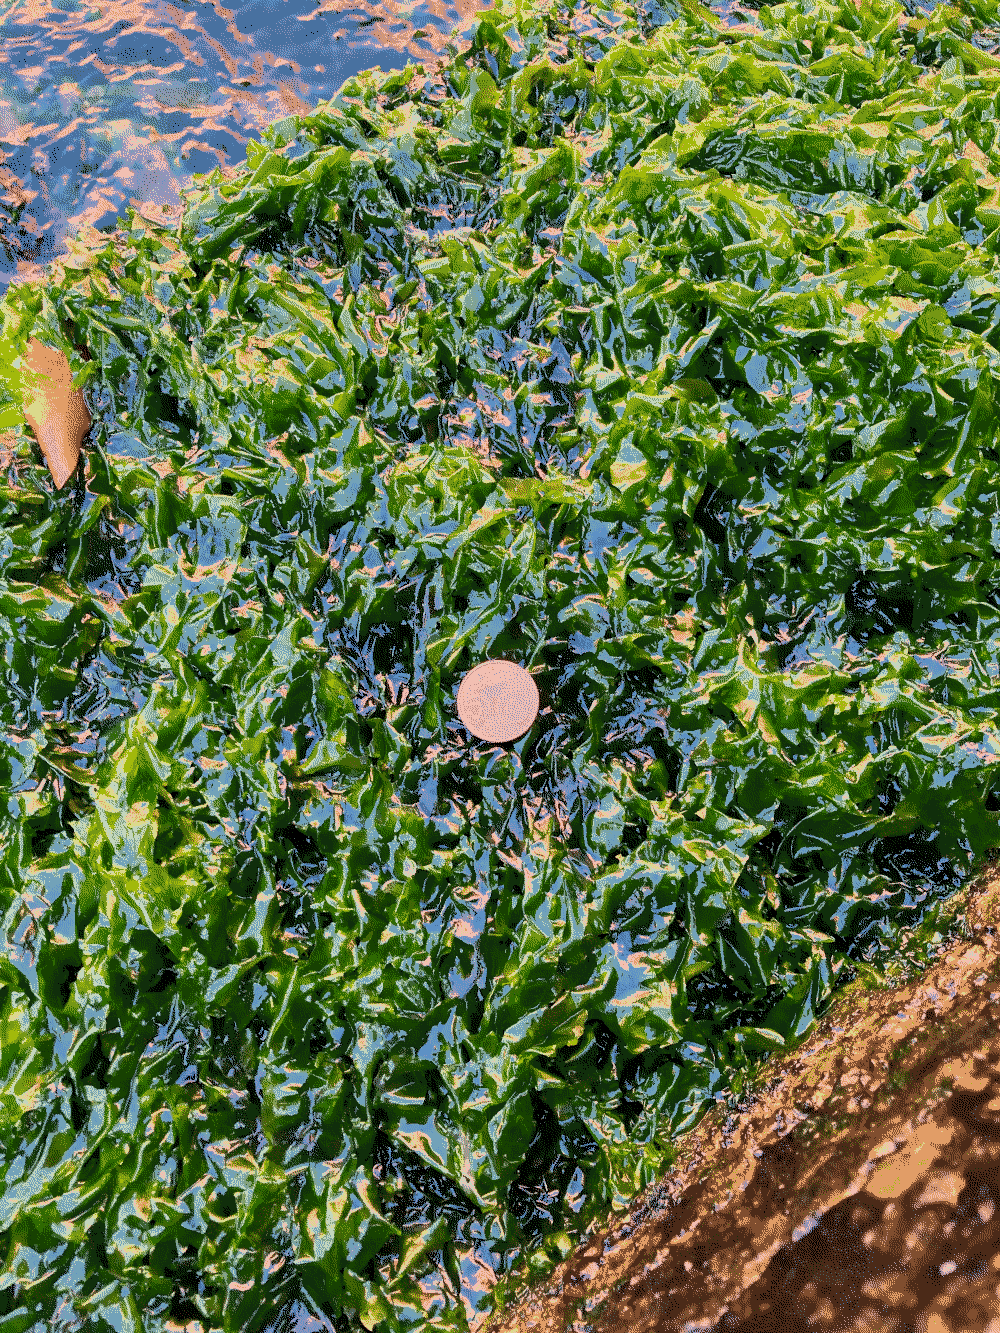 A coin sits on some algae near the water.